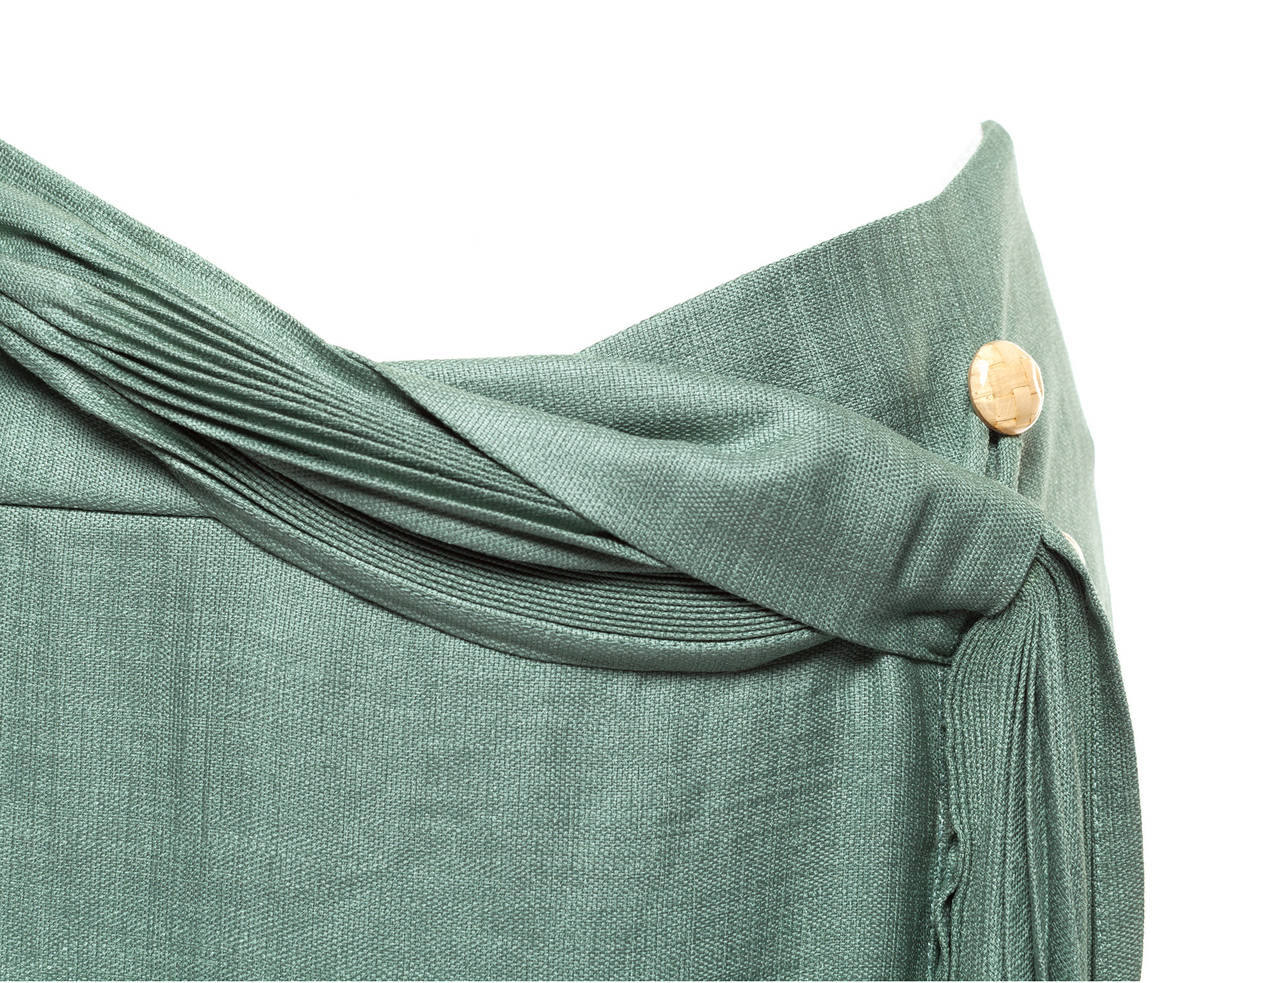 Vintage 90's Issey Miyake Celadon Green Skirt with pleated front detail, Sz. 8 1